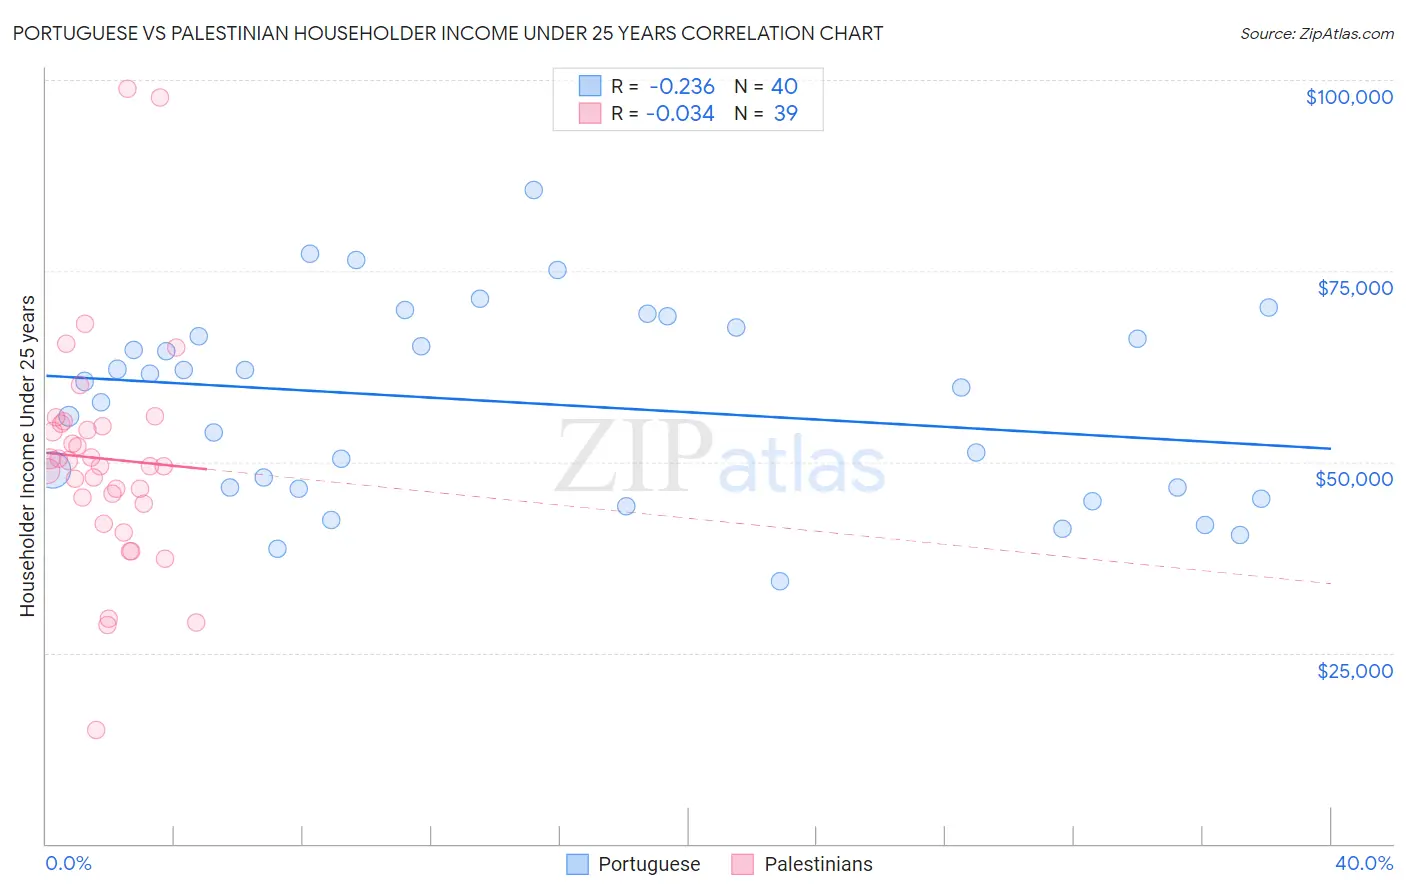 Portuguese vs Palestinian Householder Income Under 25 years